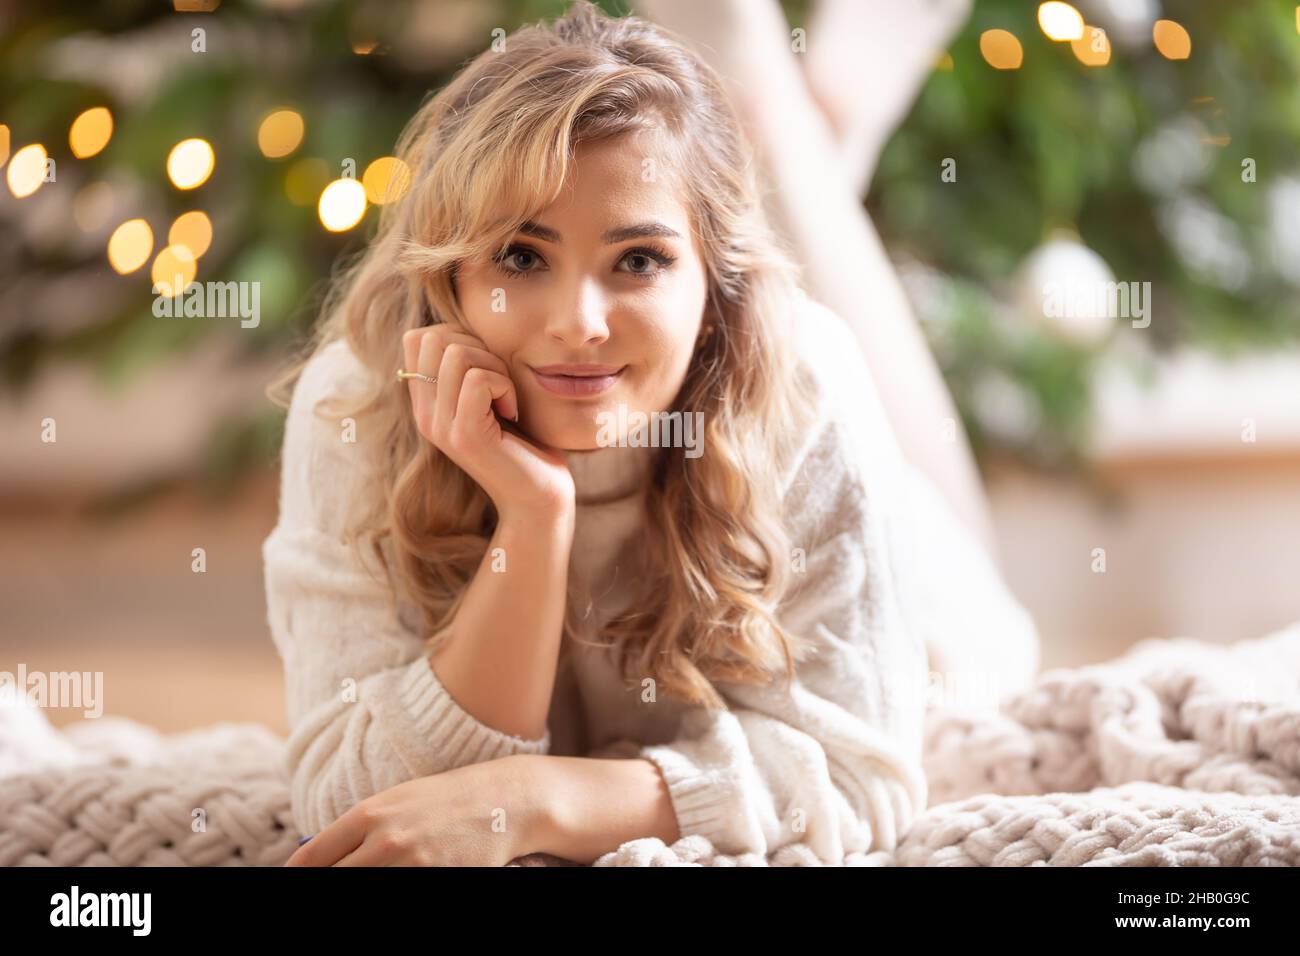 Young beautiful smiling blonde lying on a blanket next to a Christmas tree. Stock Photo